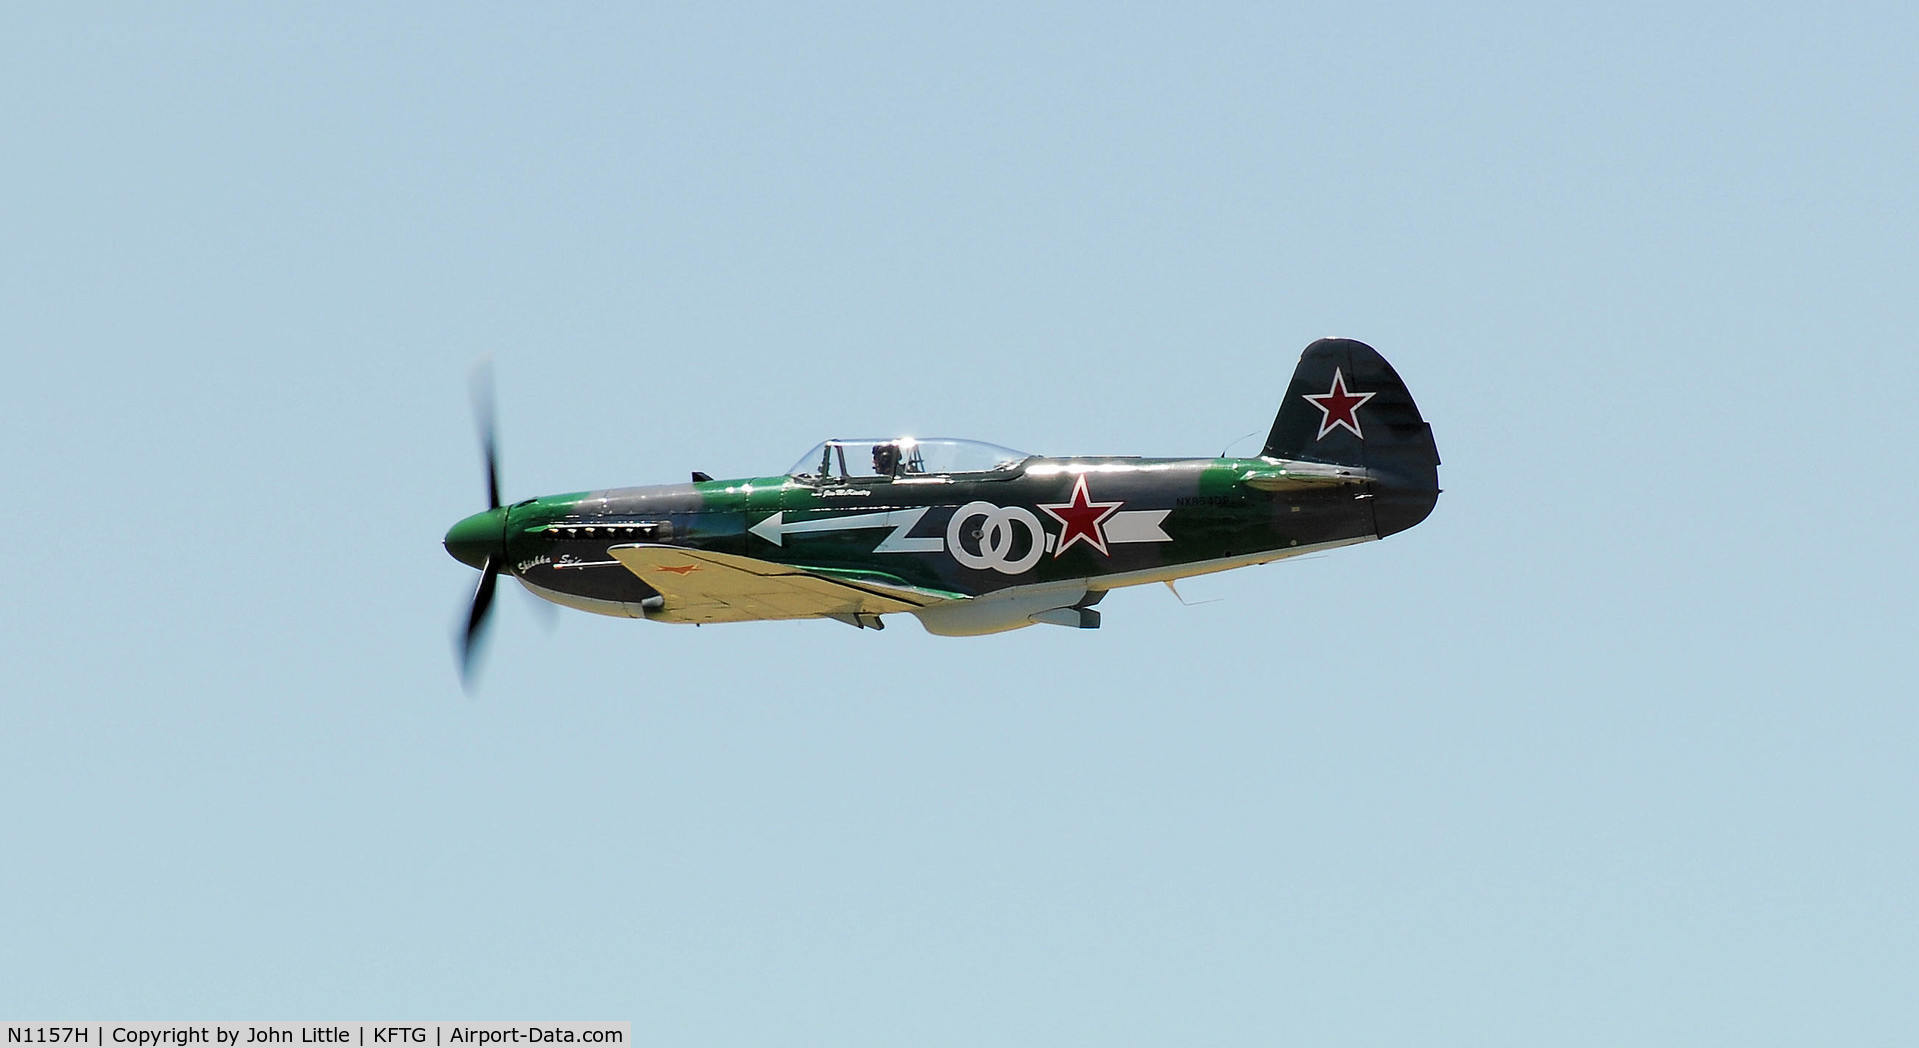 N1157H, 1994 Yakovlev Yak-9U-M C/N 0470402, Fly By Russian Design mix between Mustang and Spitifire